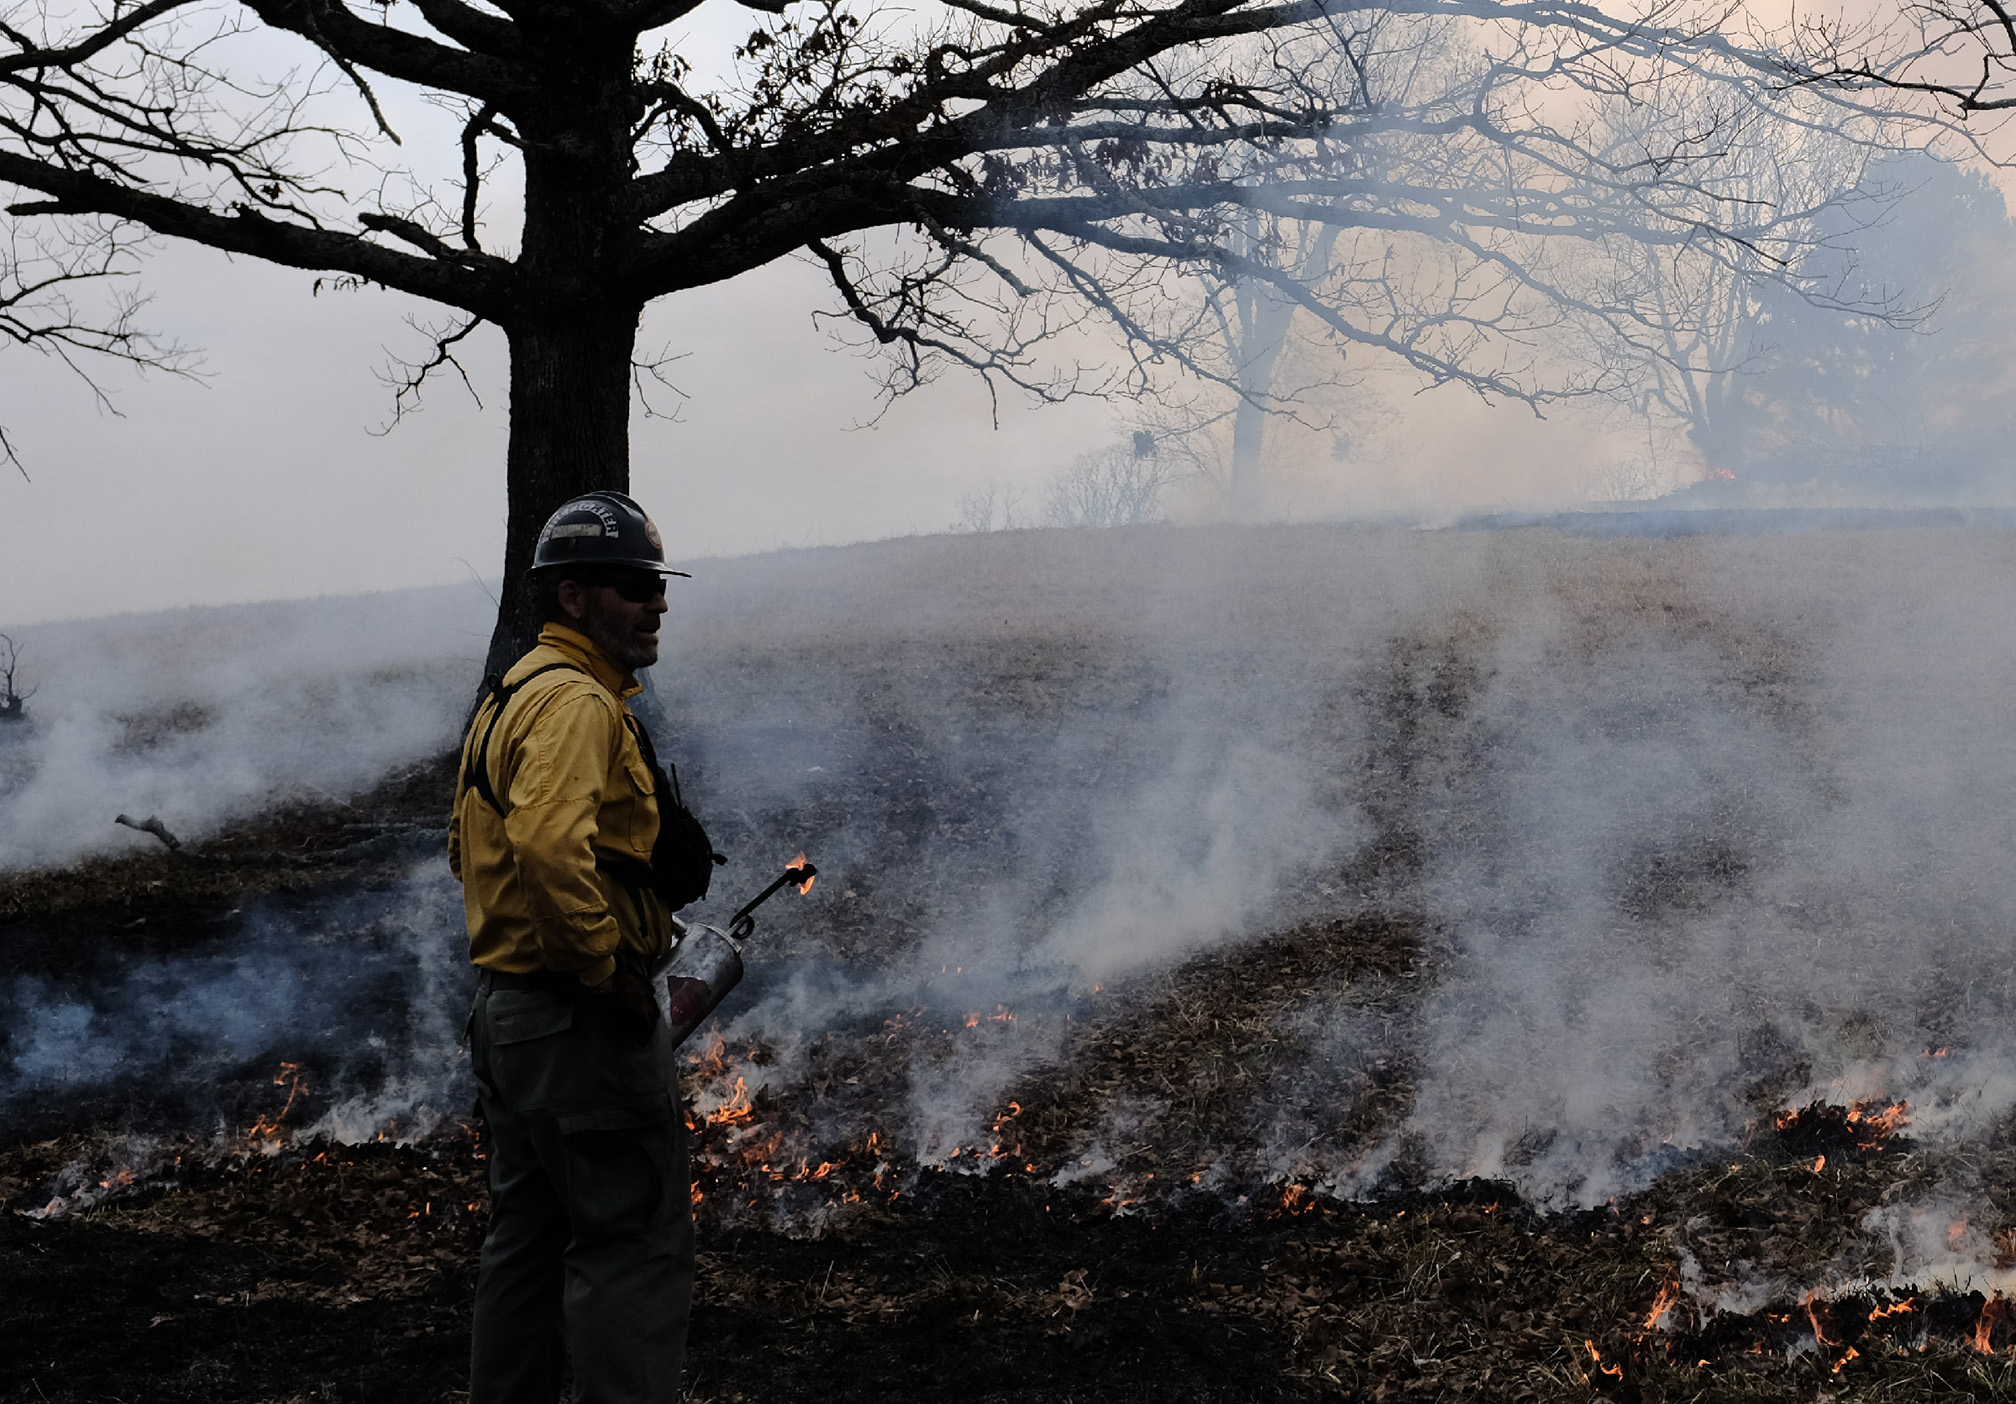 Smoke drifts across a prairie during a controlled burn. A firefighter wearing a yellow shirt and hard hat stands beside the flames.